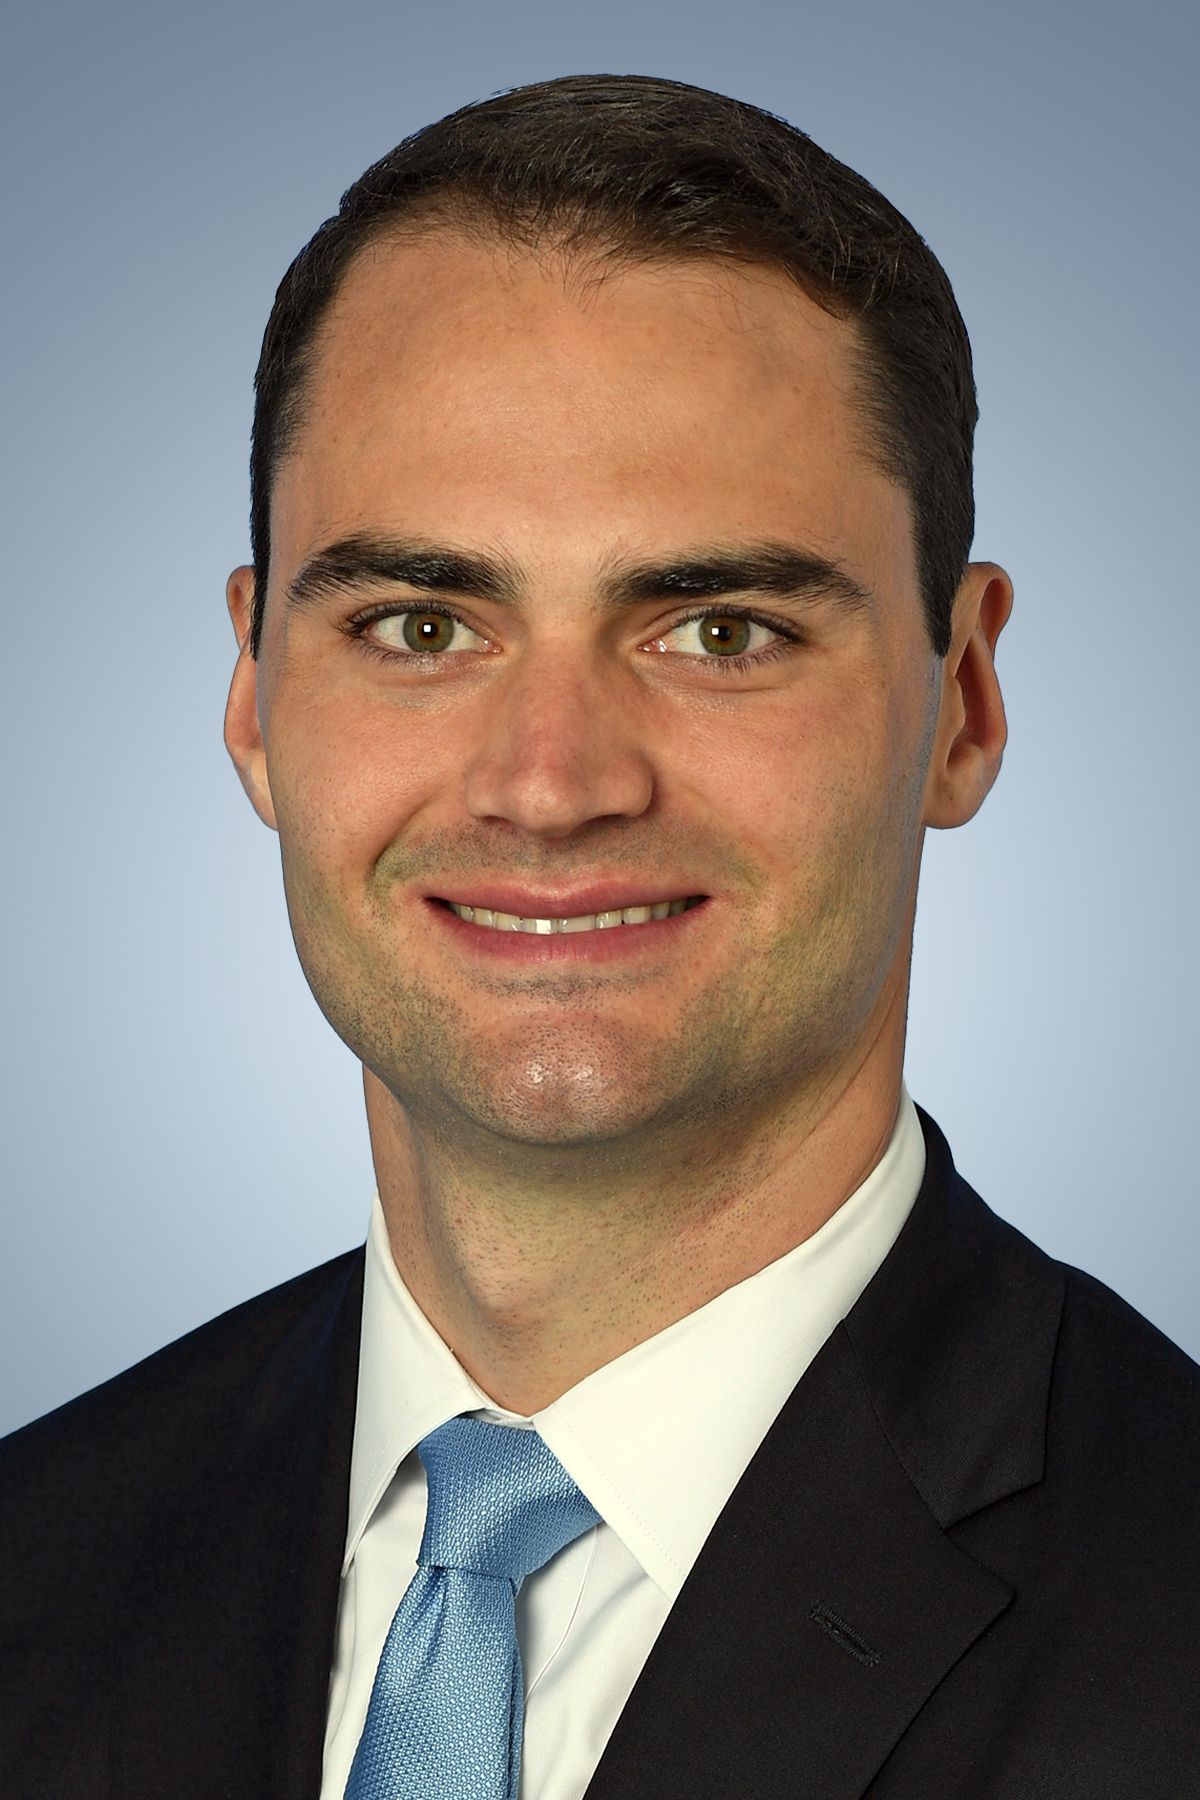 Austin R. Kummer, CFA, is Vice President and Senior Portfolio Manager for Dividend Equity and Multi-Sector Fixed Income strategies at Fort Washington Investment Advisors